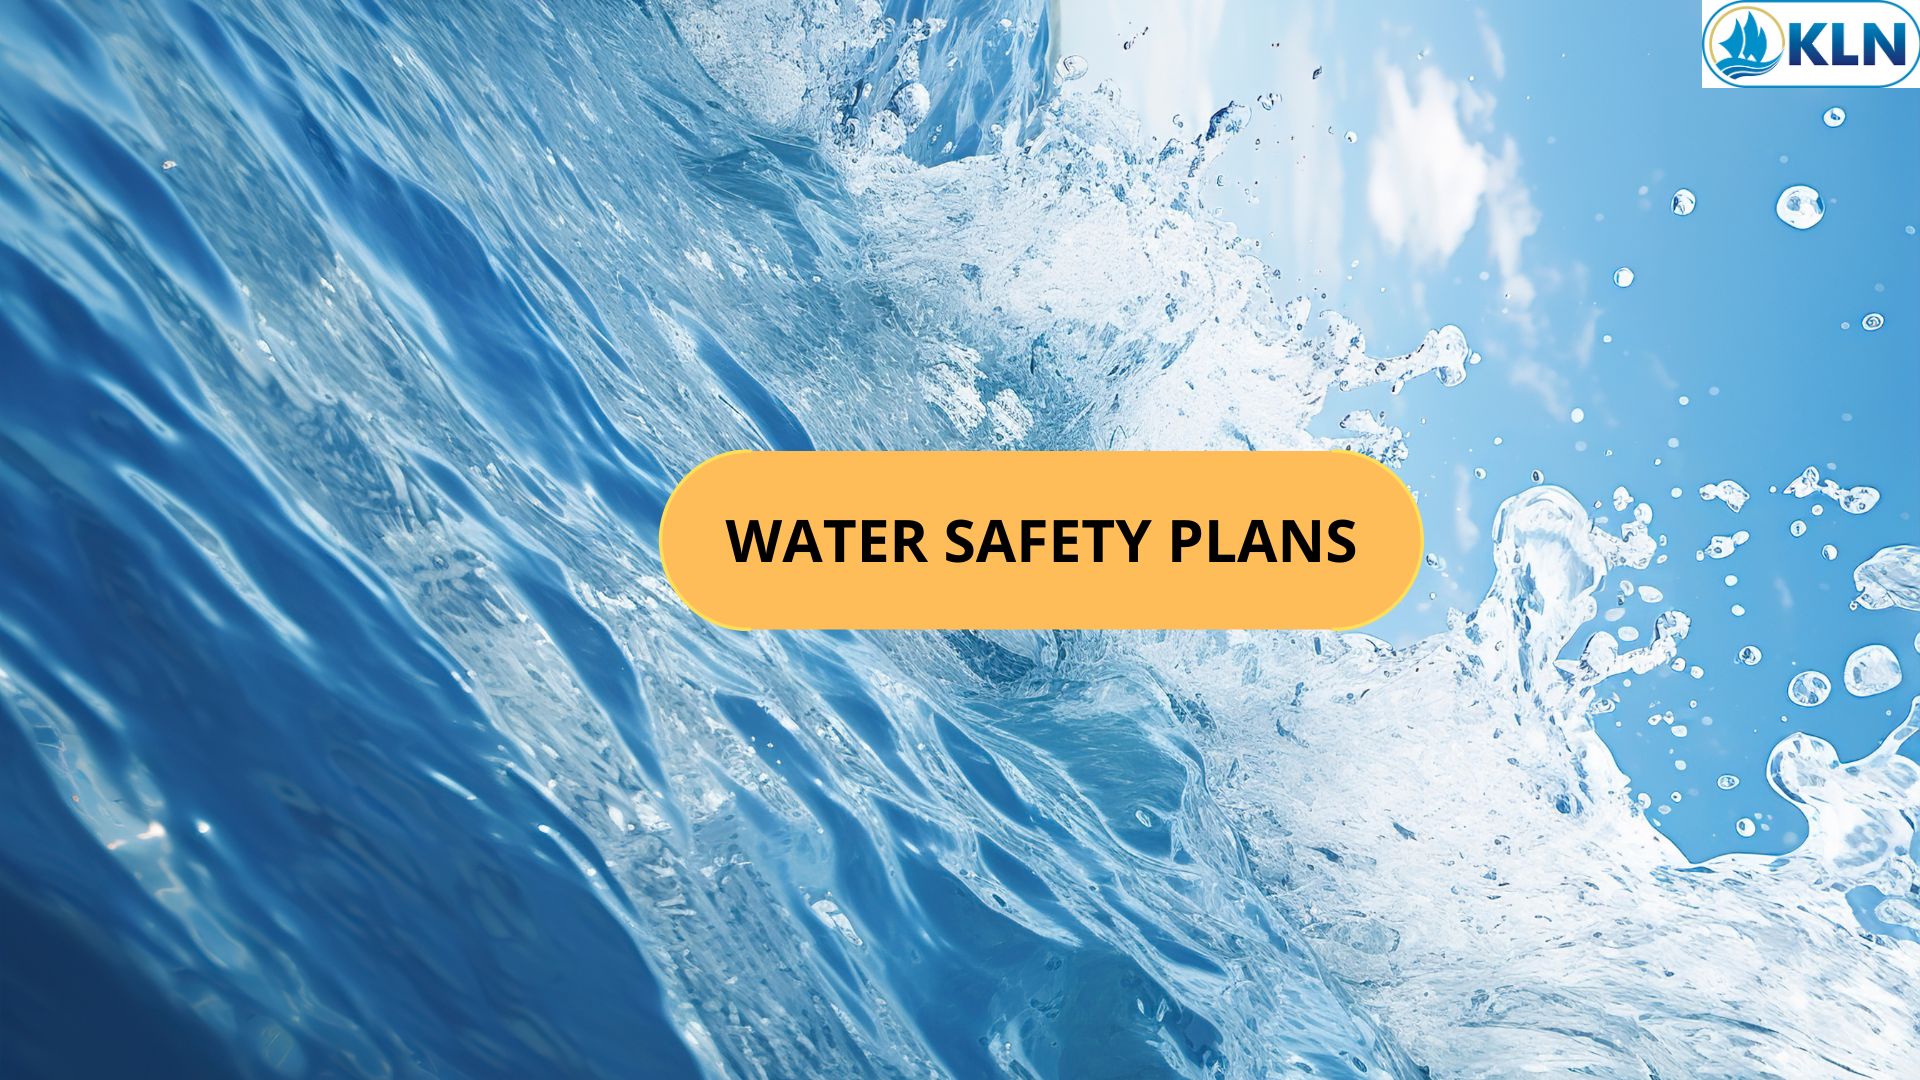 WATER SAFETY PLANS